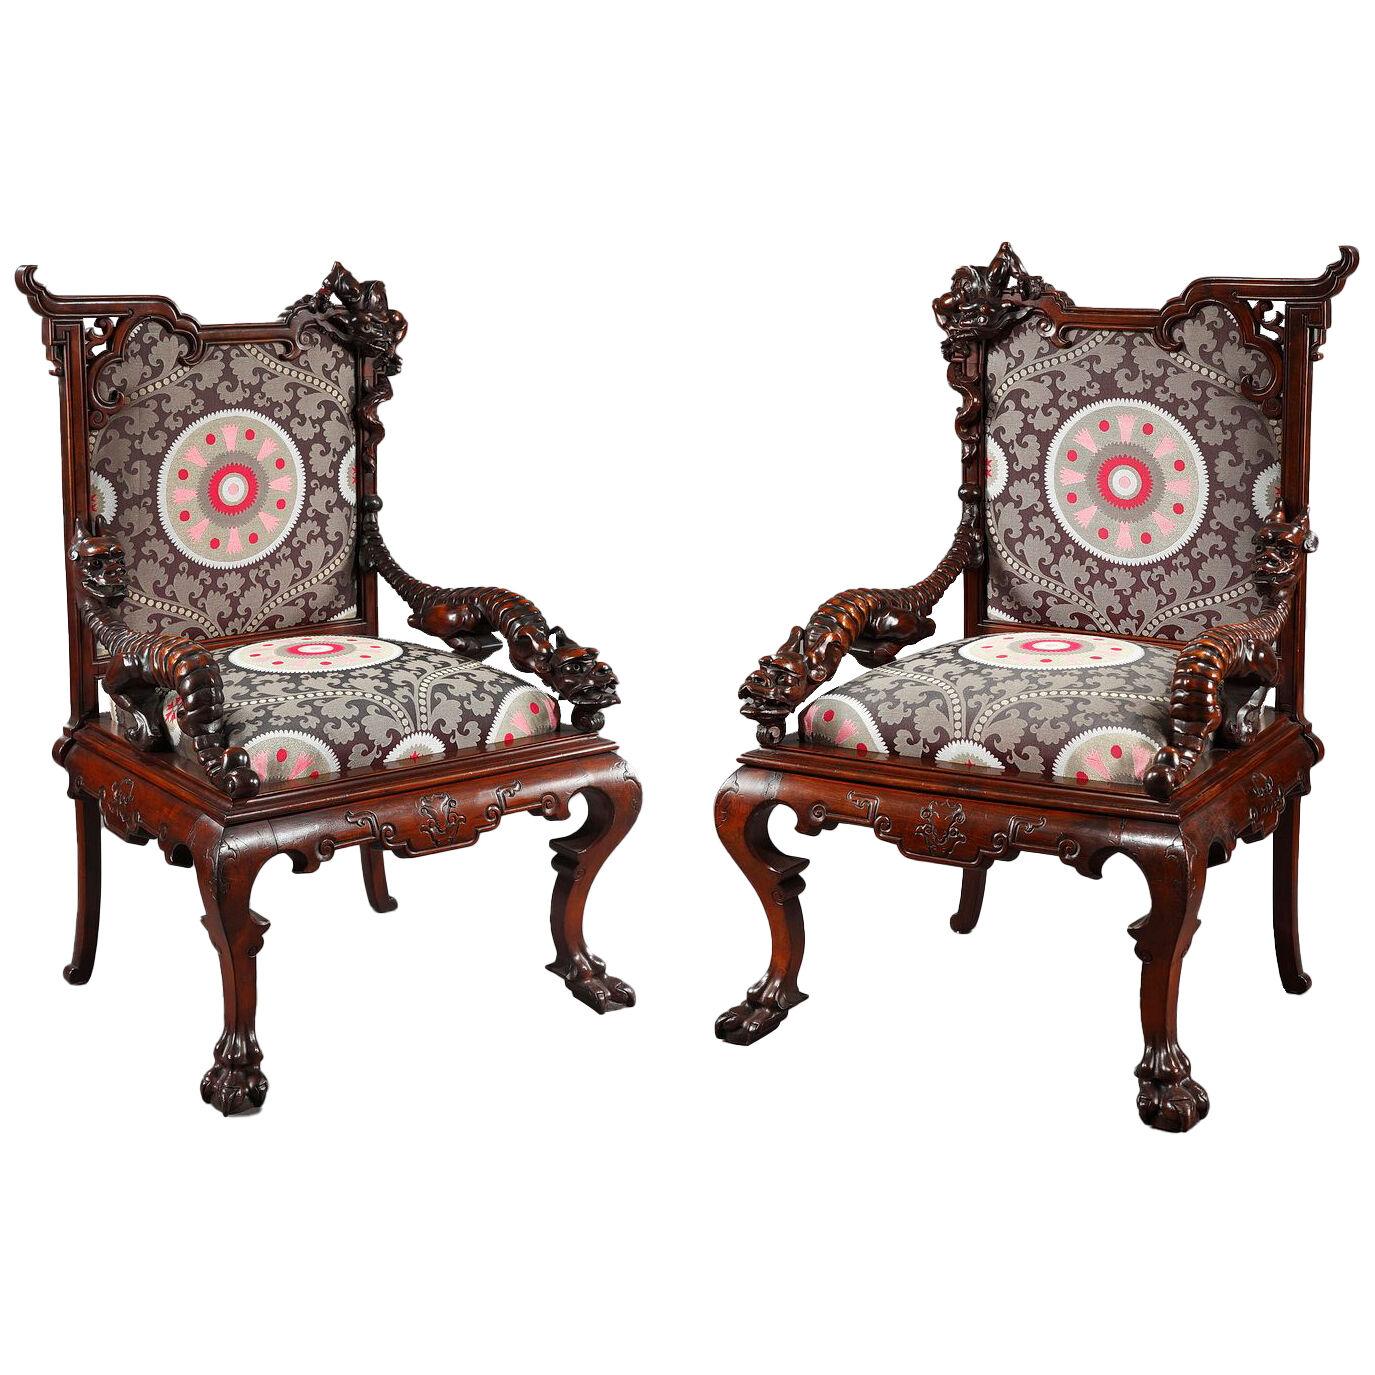 Pair of Aesthetic Movement Armchairs Attributed to G.Viardot, France, Circa 1880